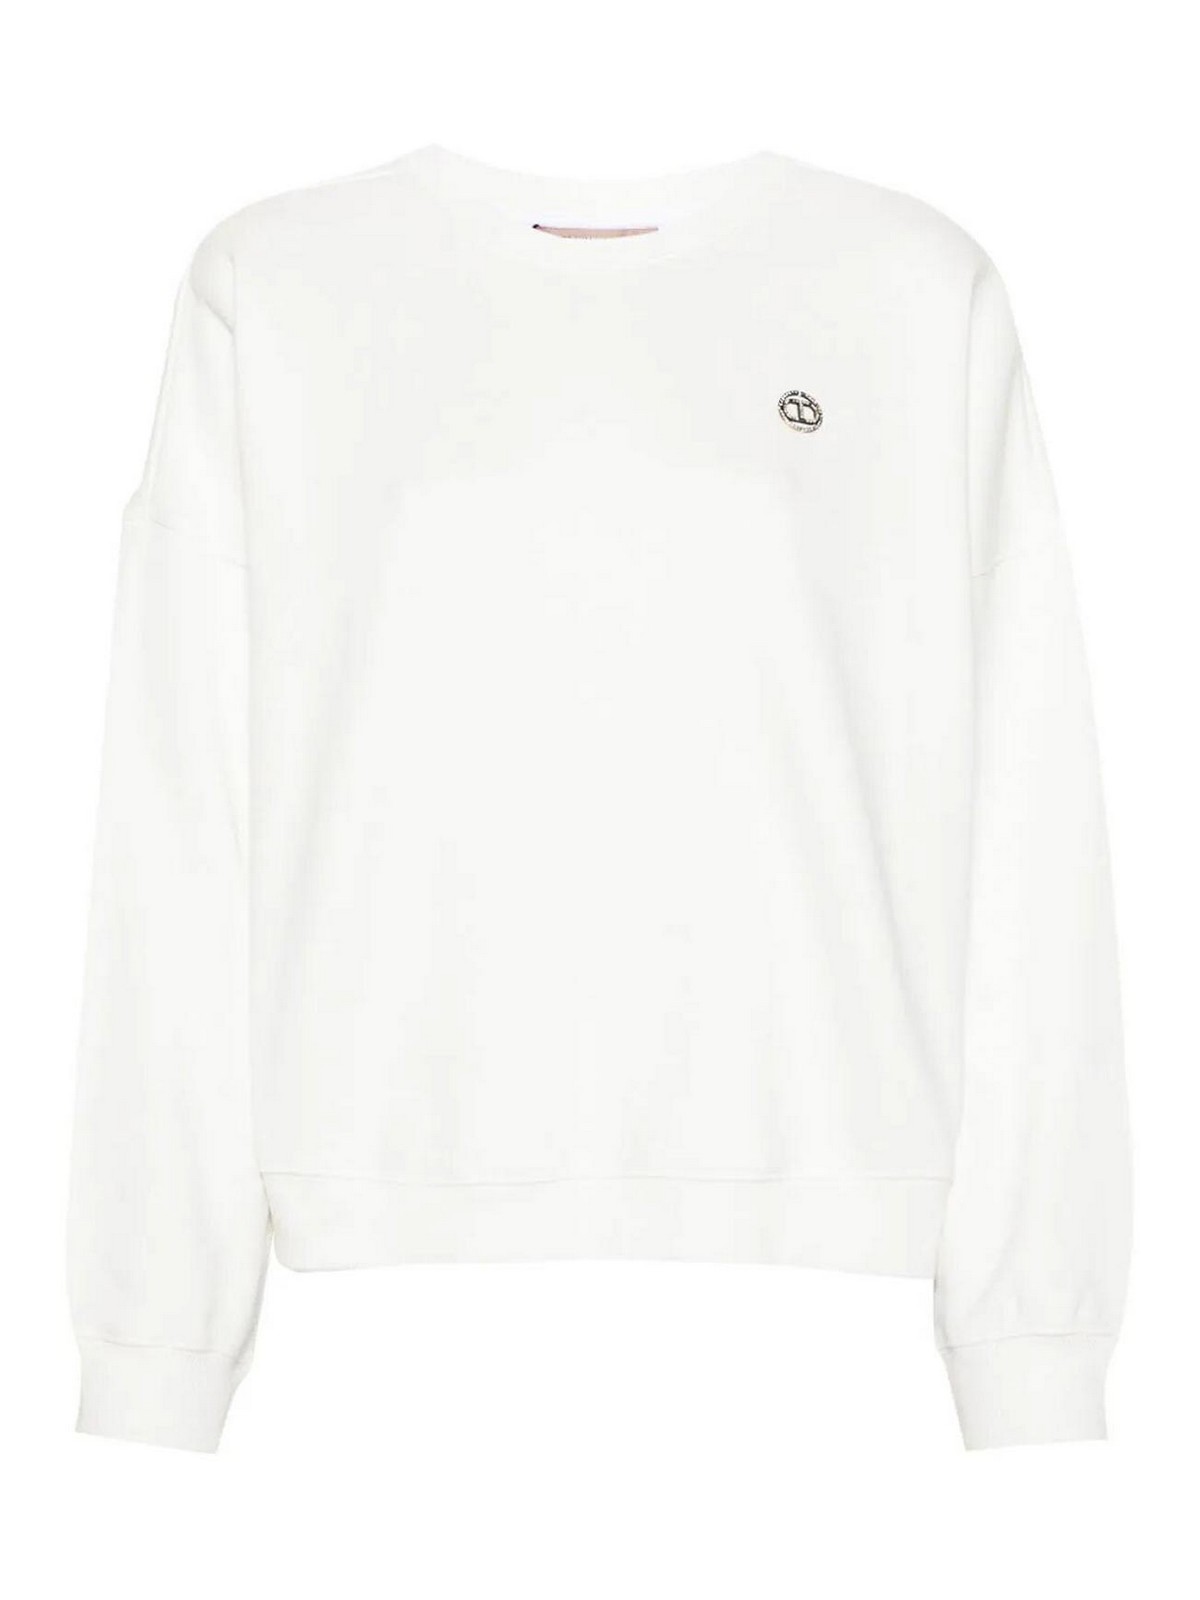 TWINSET CREW-NECK SWEATSHIRT WITH OVAL T DETAIL